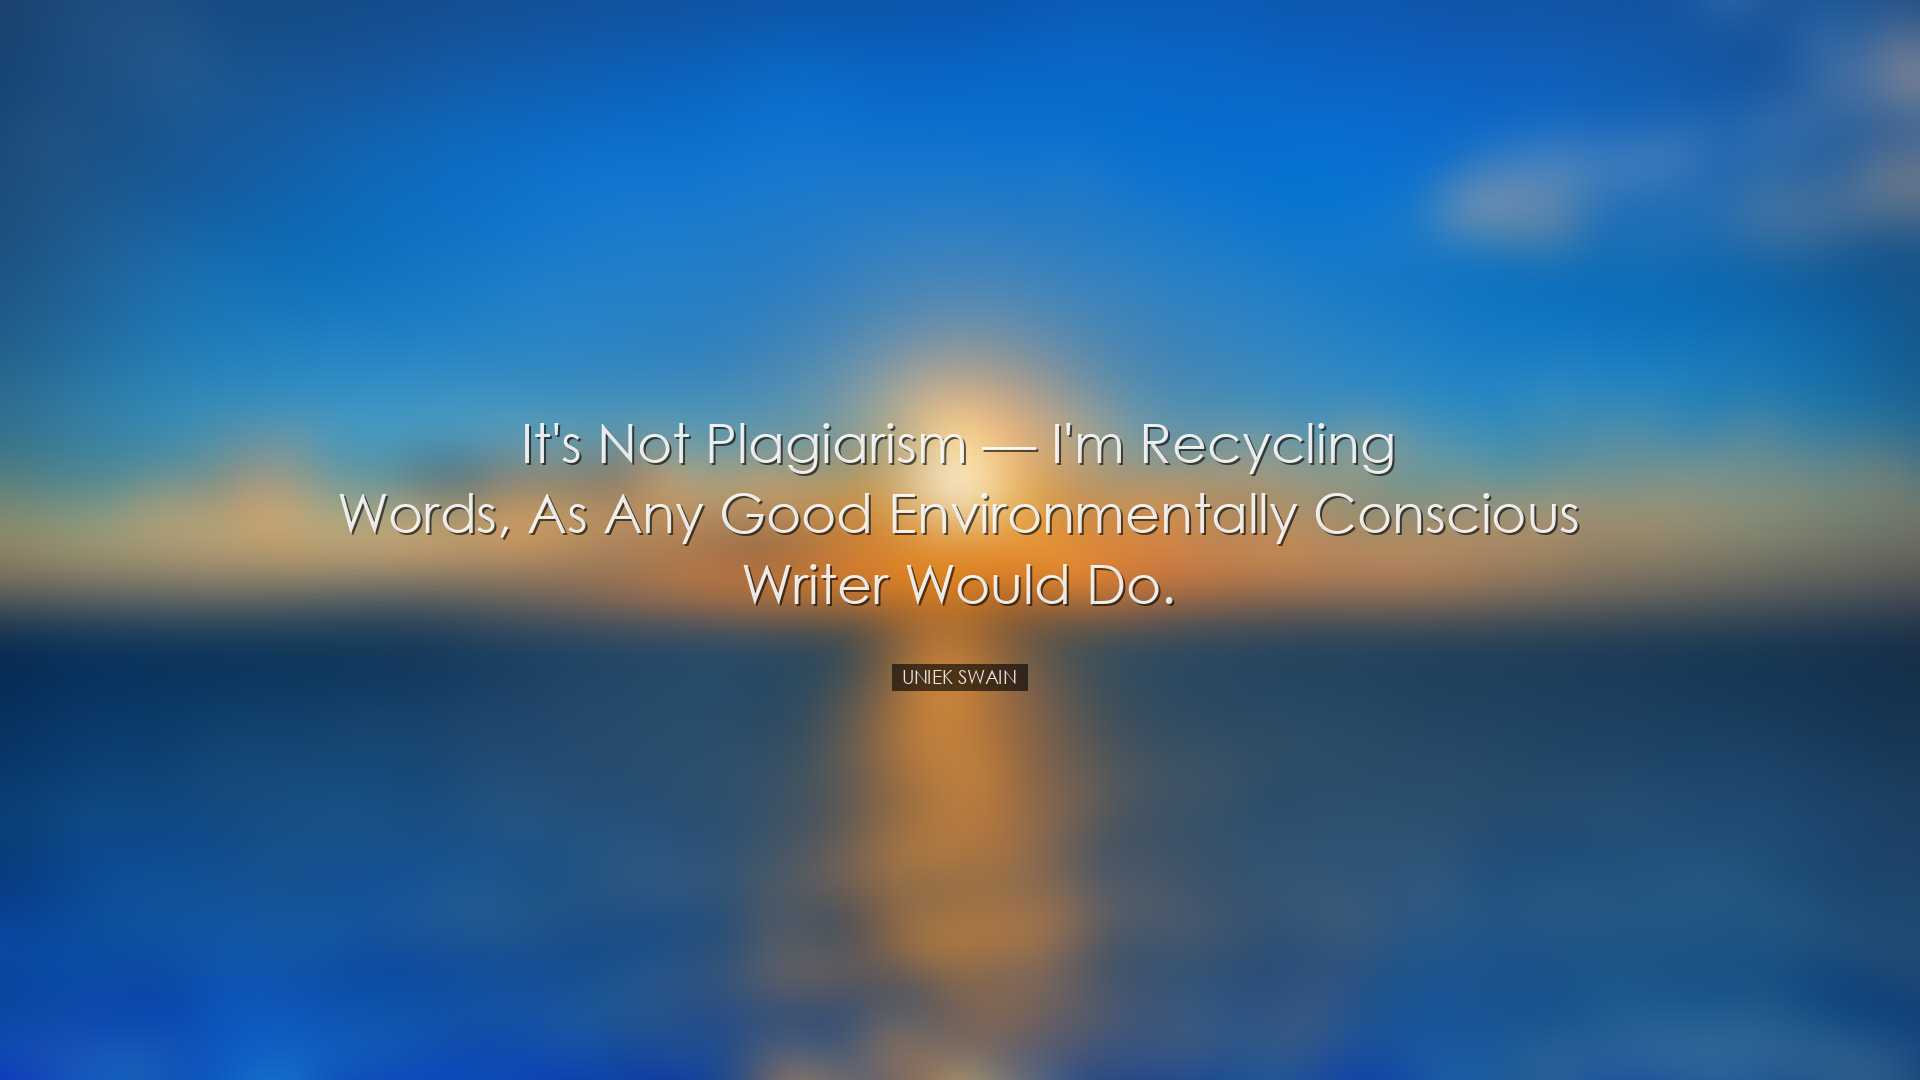 It's not plagiarism — I'm recycling words, as any good envir